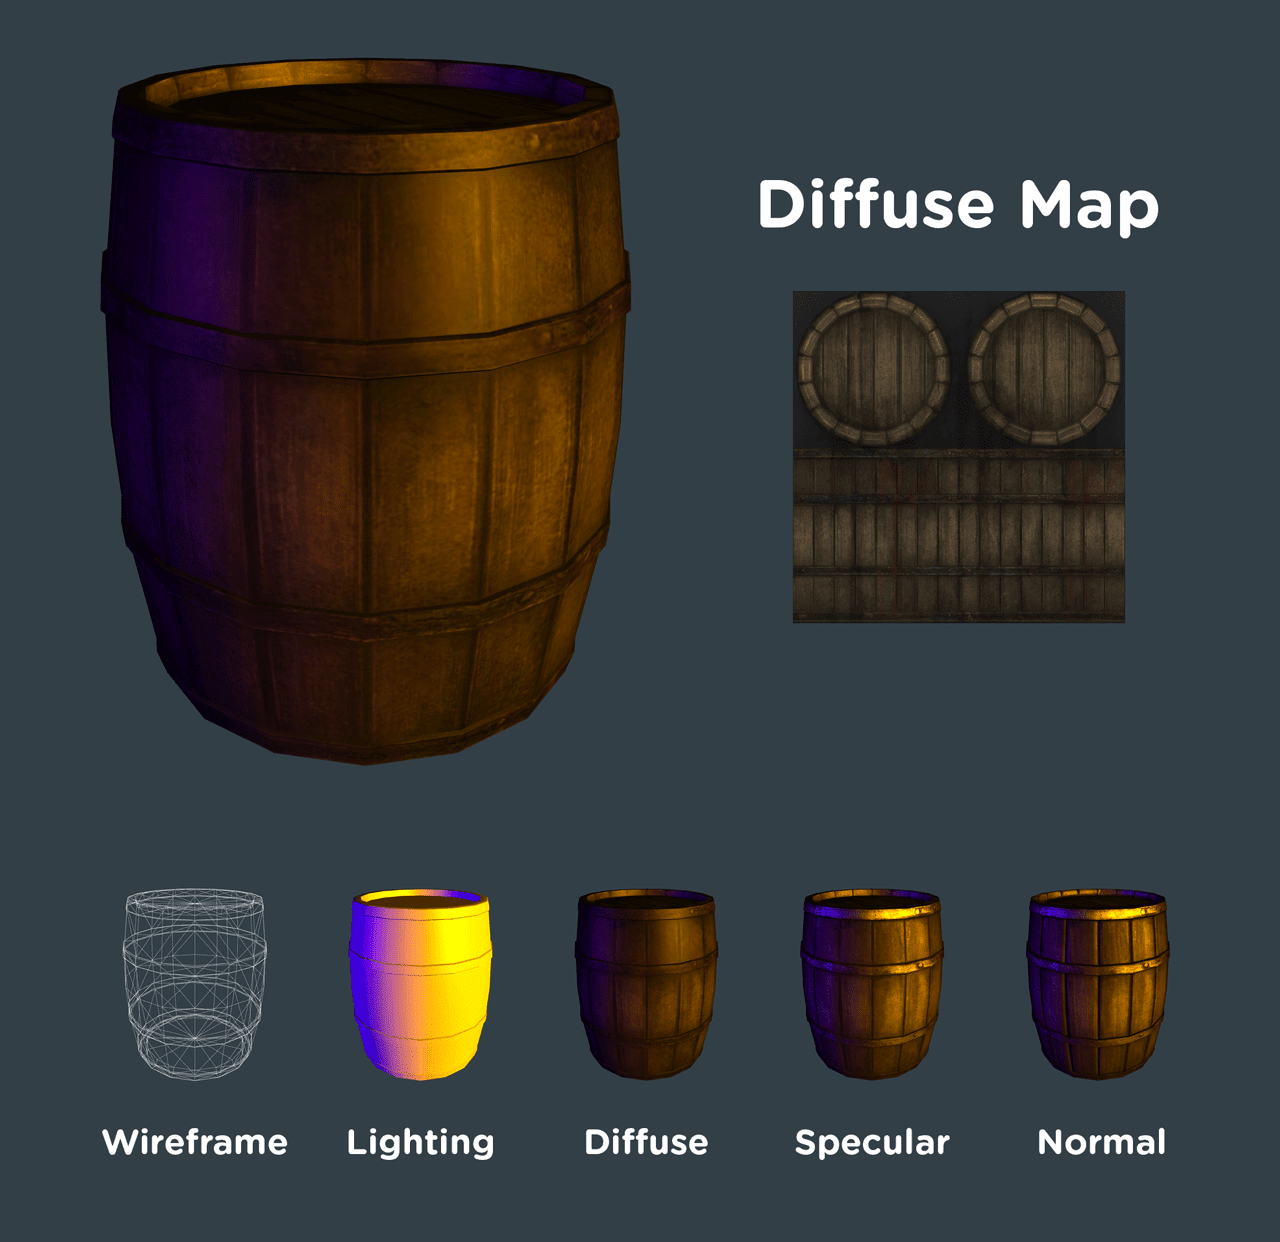 Diffuse map applied to the barrel geometry.